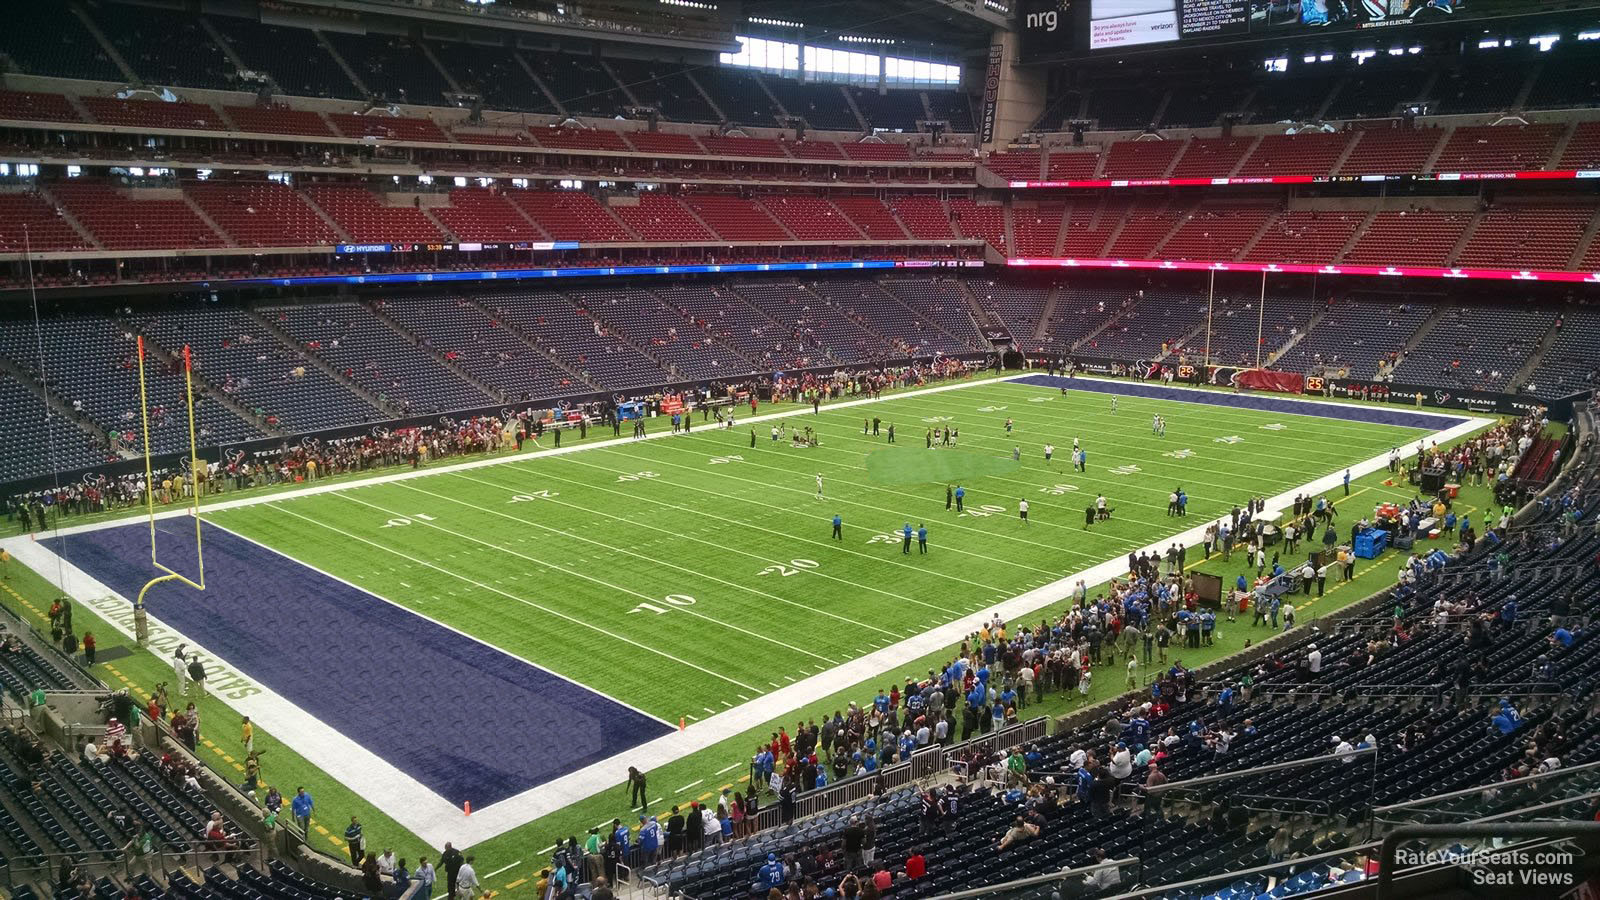 section 344, row l seat view  for football - nrg stadium